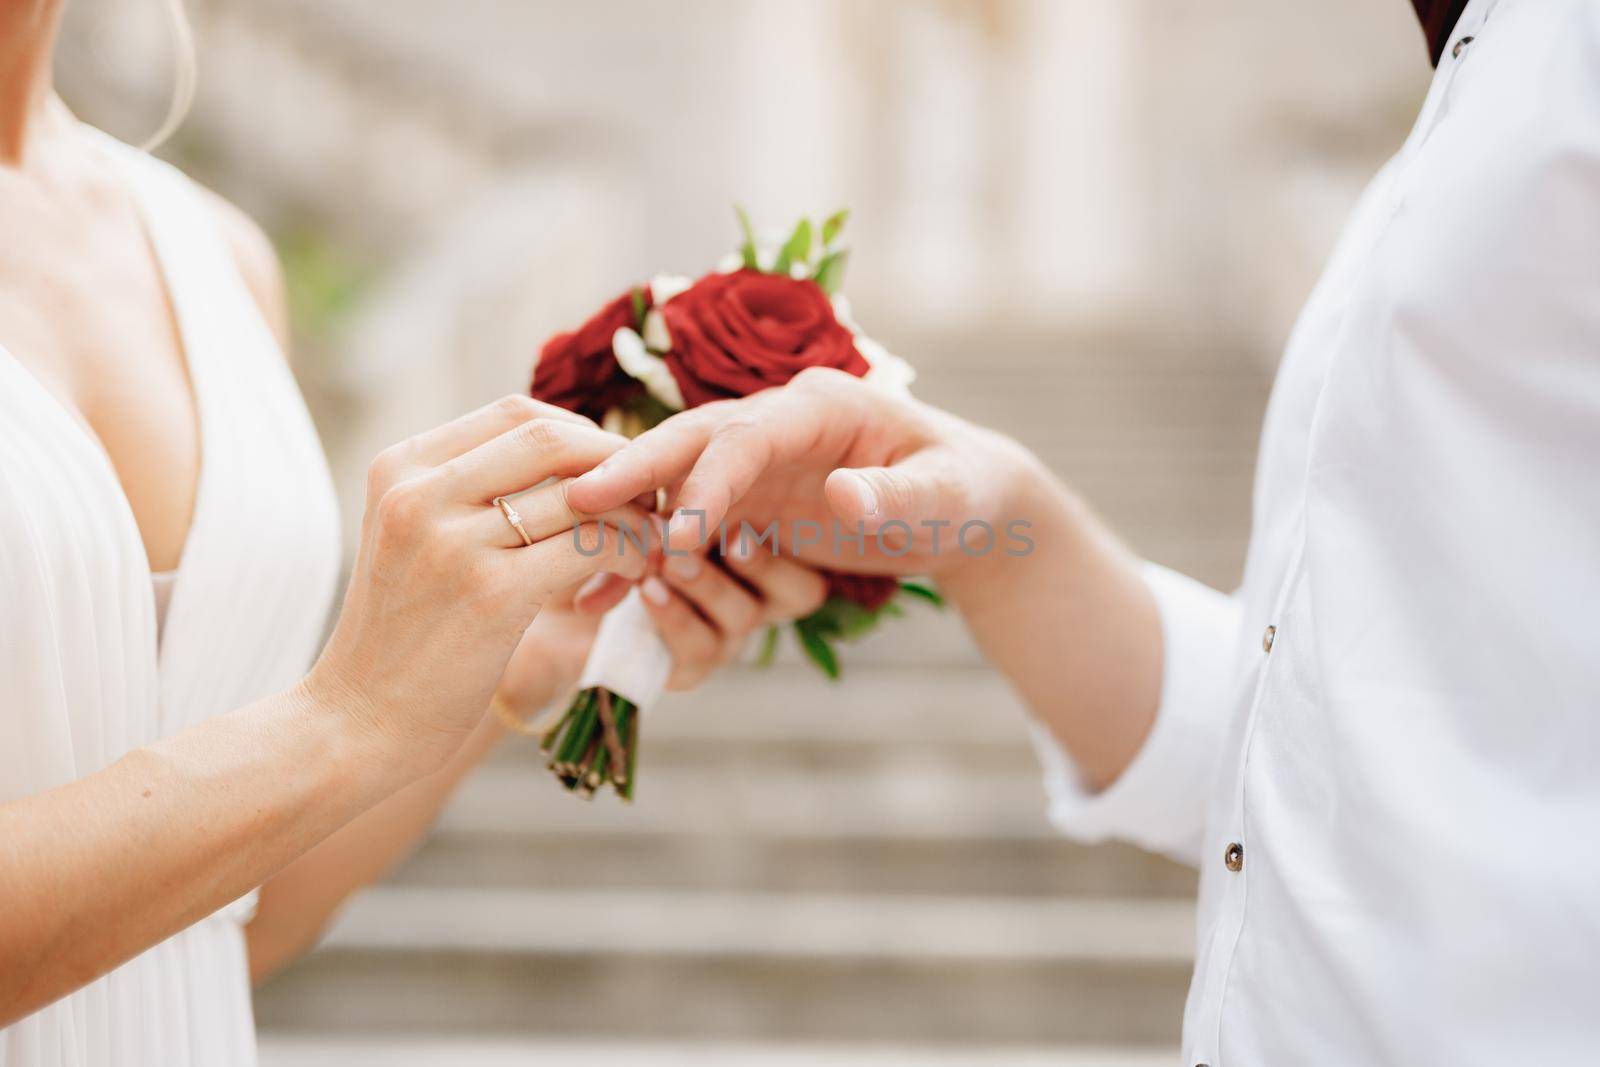 The bride puts a wedding ring on the groom's finger and holds a bouquet of red and white roses in her hand by Nadtochiy